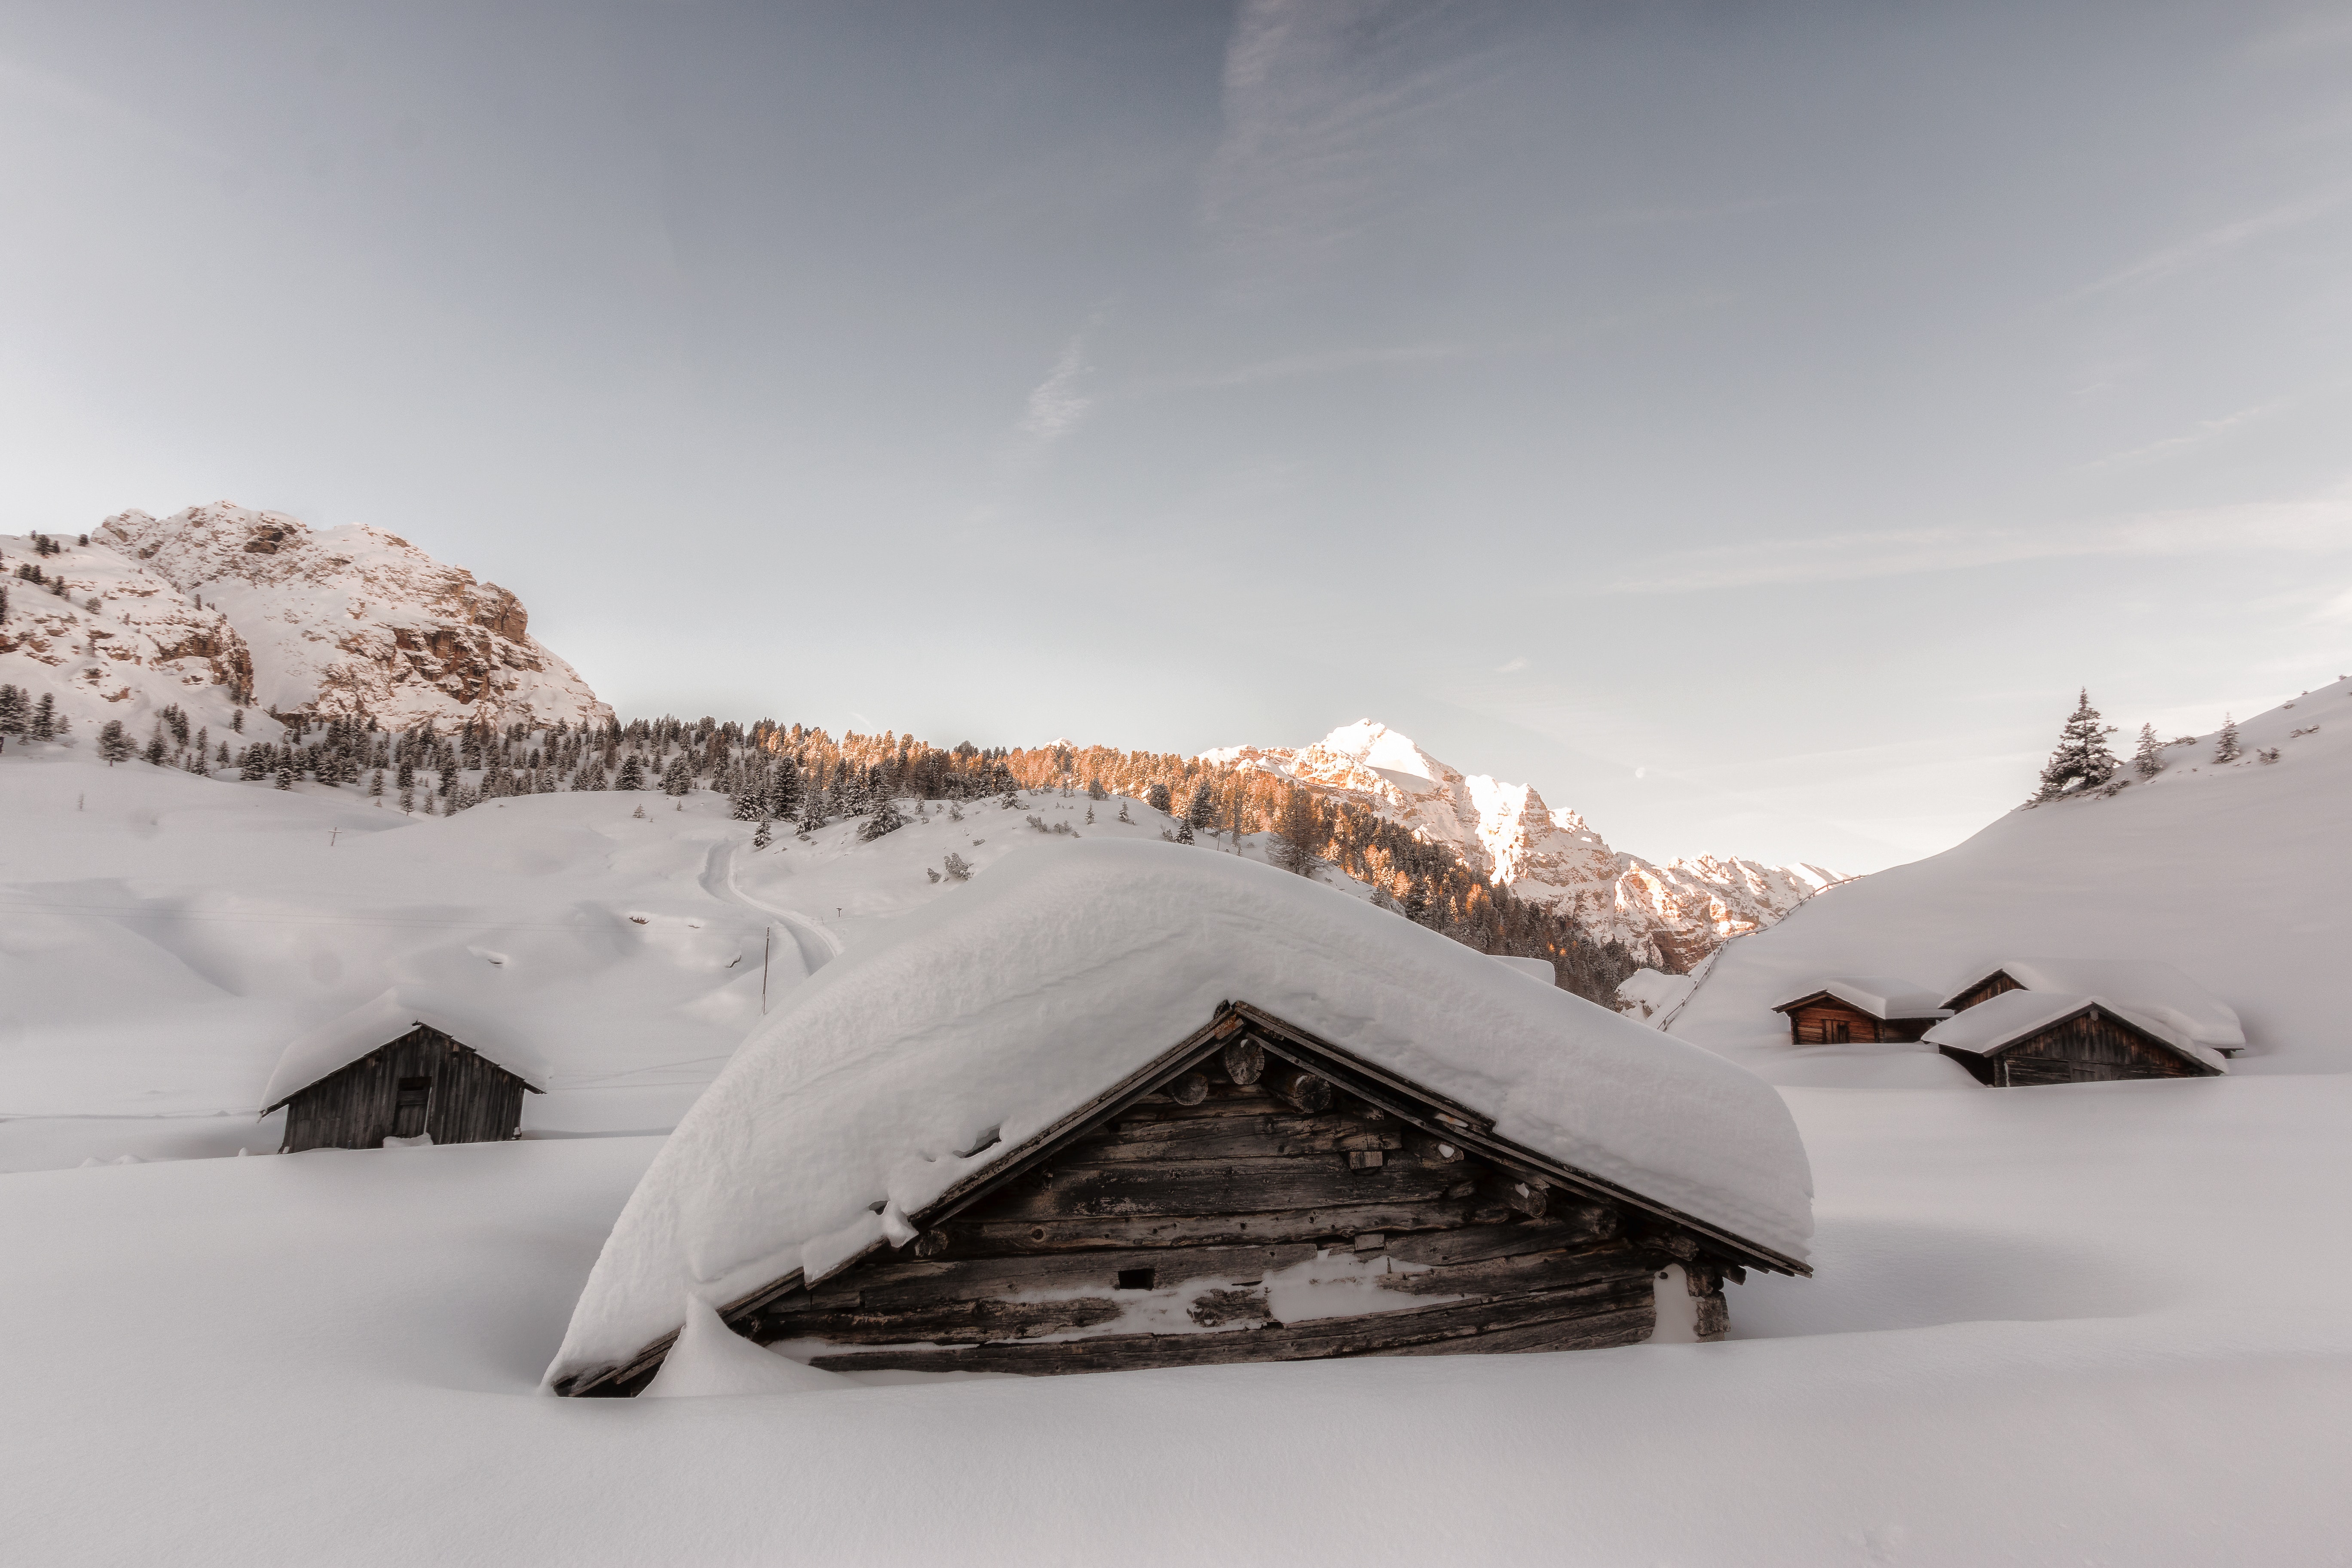 Brown wooden houses covered in snow at daytime photo